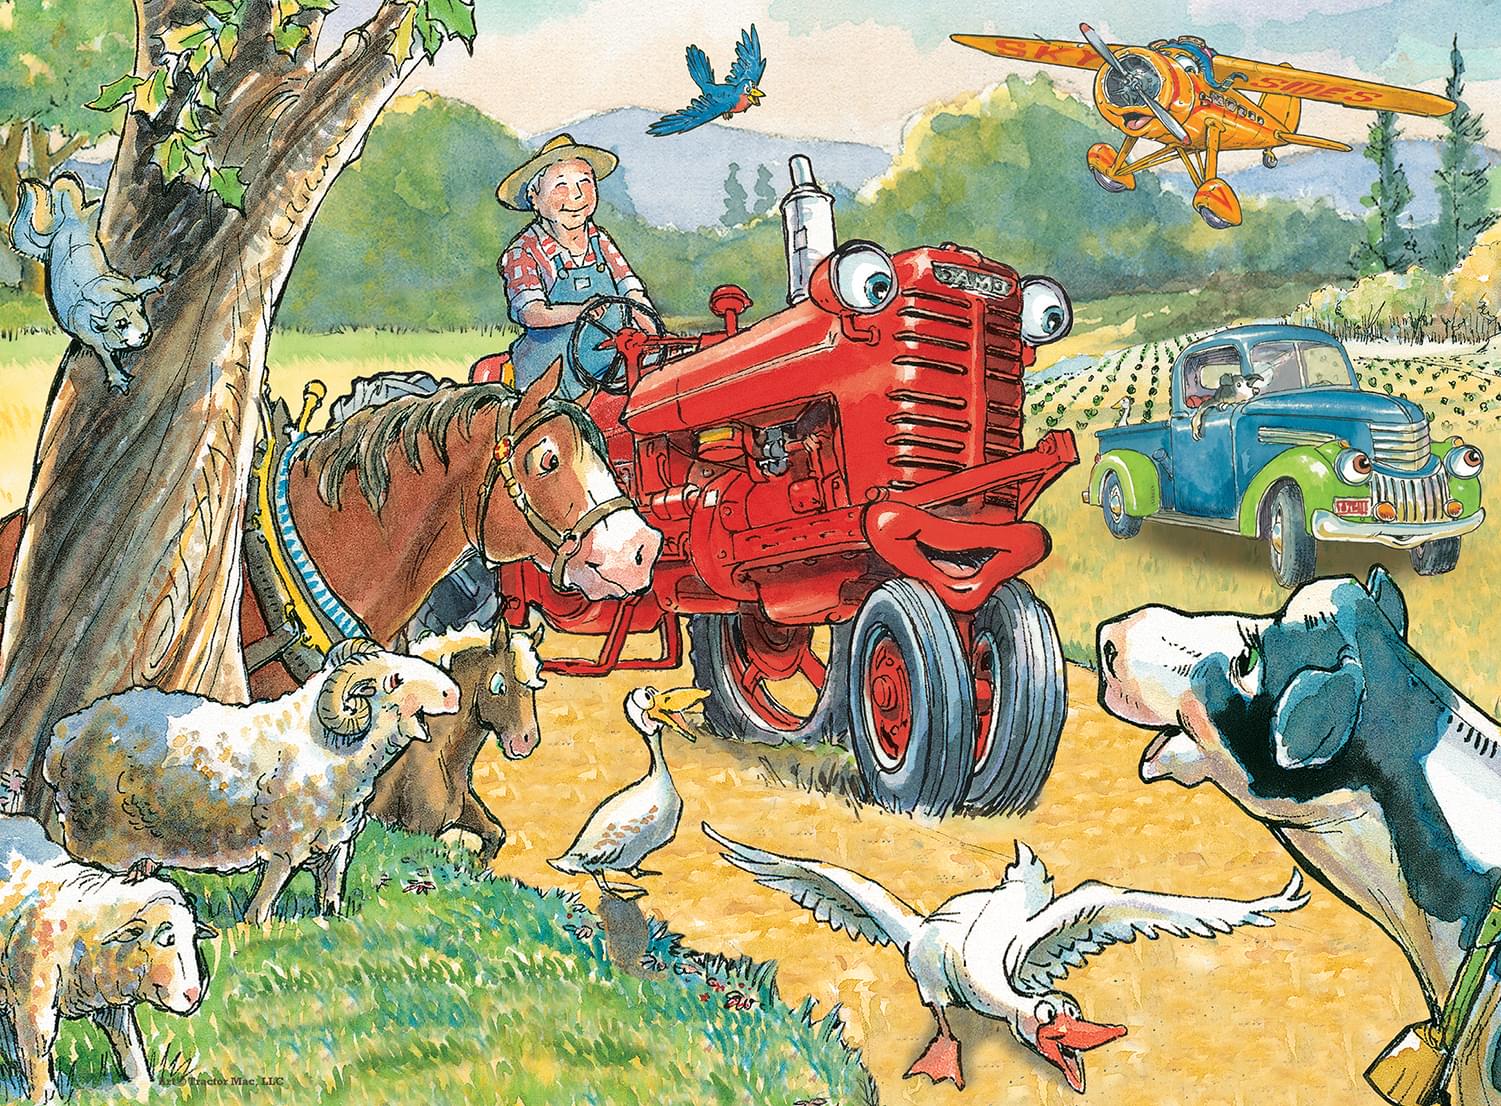 Tractor Mac Out for a Ride 60 Piece Jigsaw Puzzle